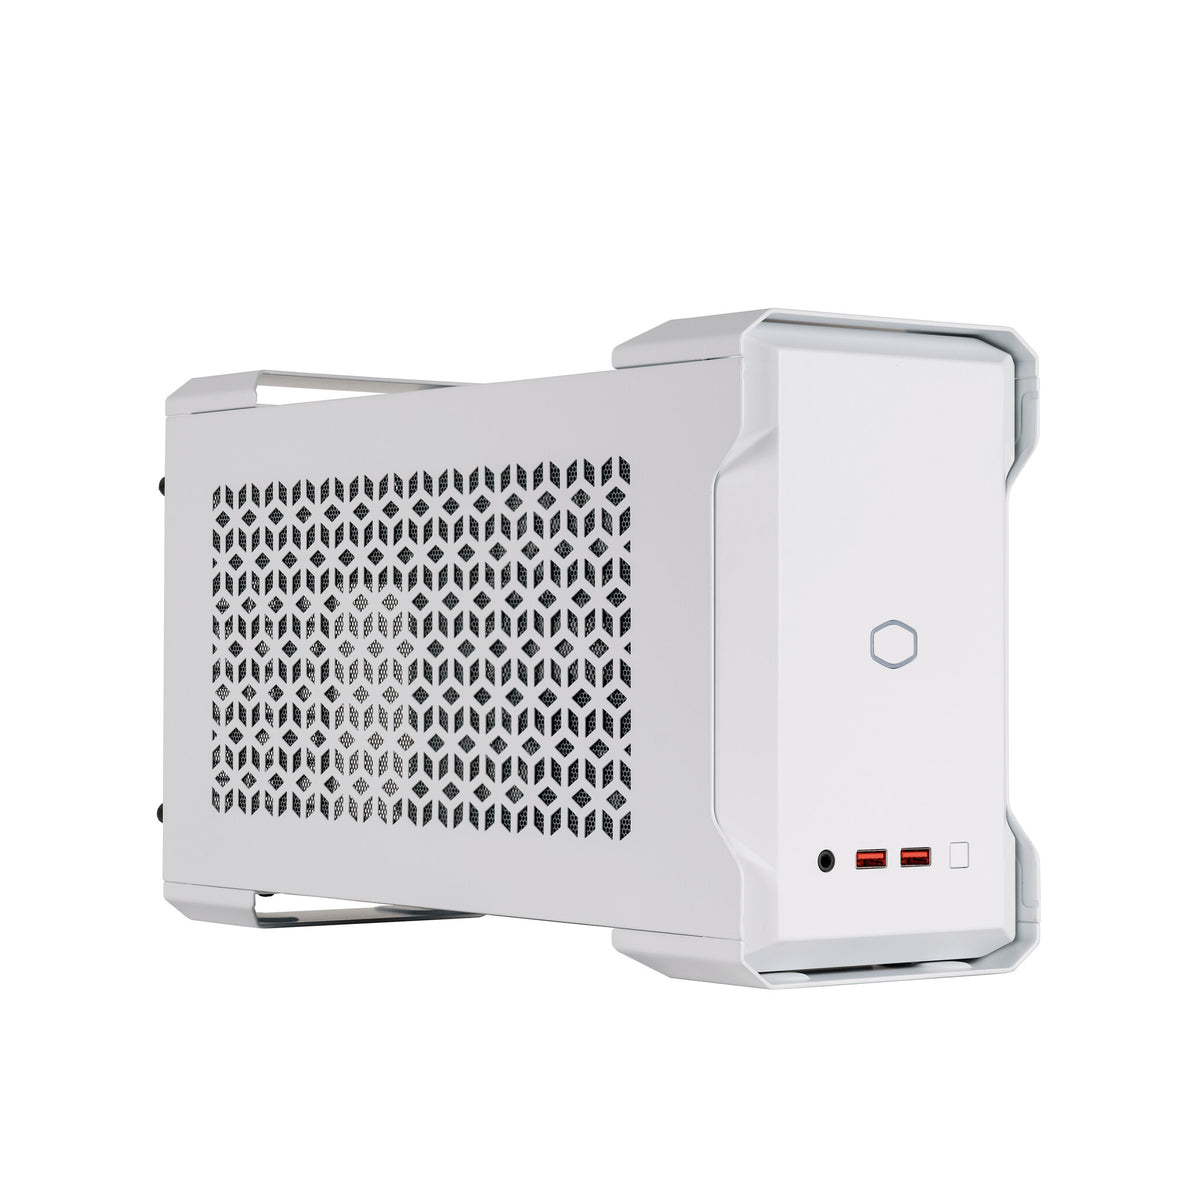 Cooler Master MasterCase NC100 - Small Form Factor PC Case in White